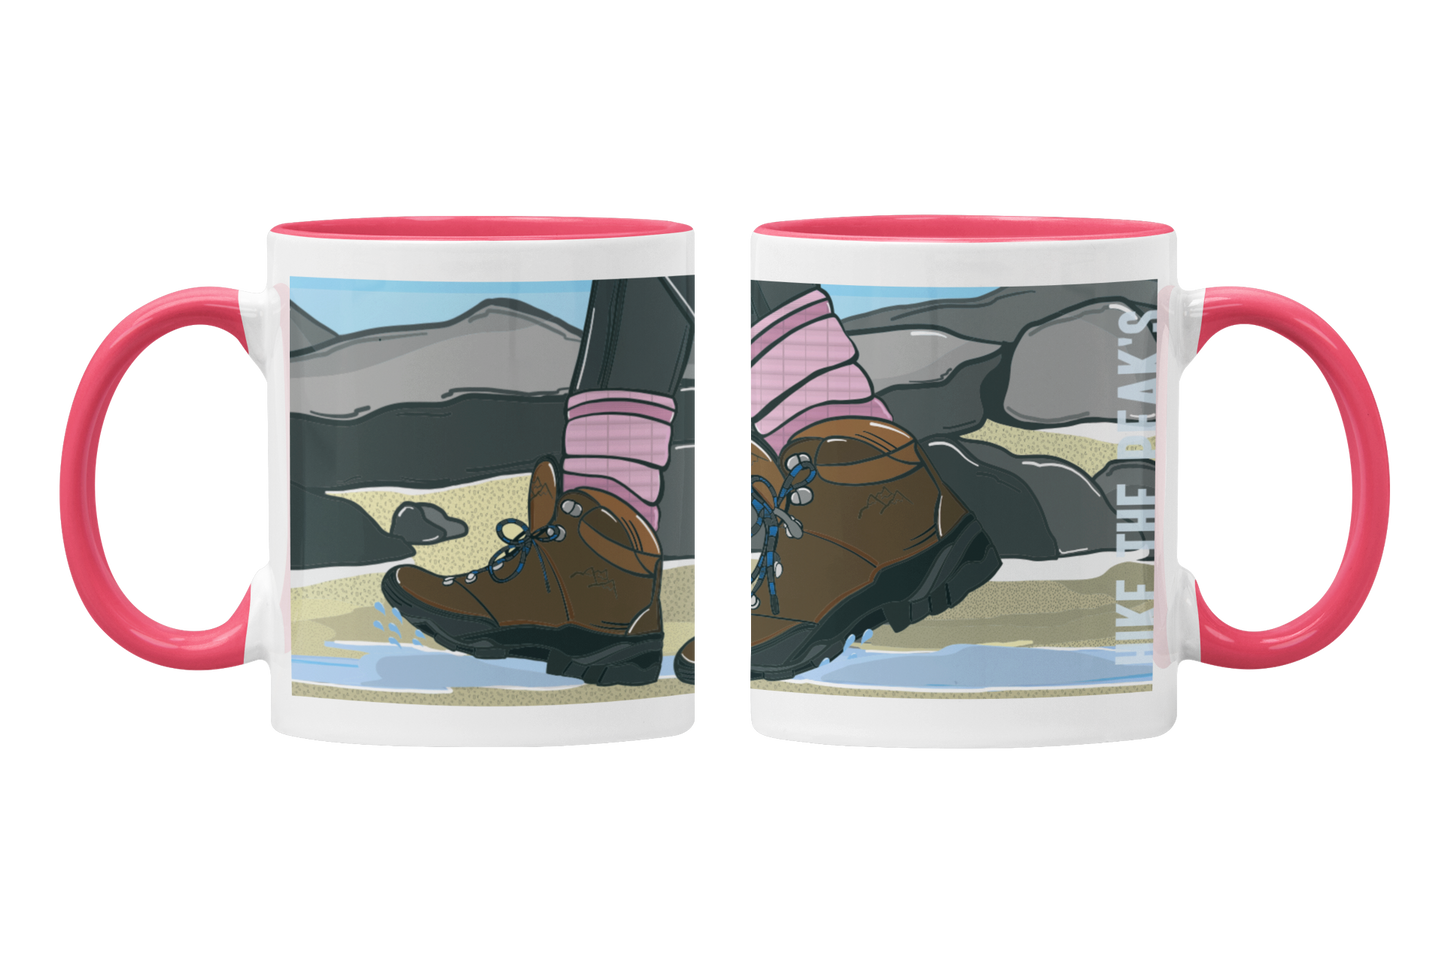 HIKES IN THE PEAKS - Mug - Peak District Art collection